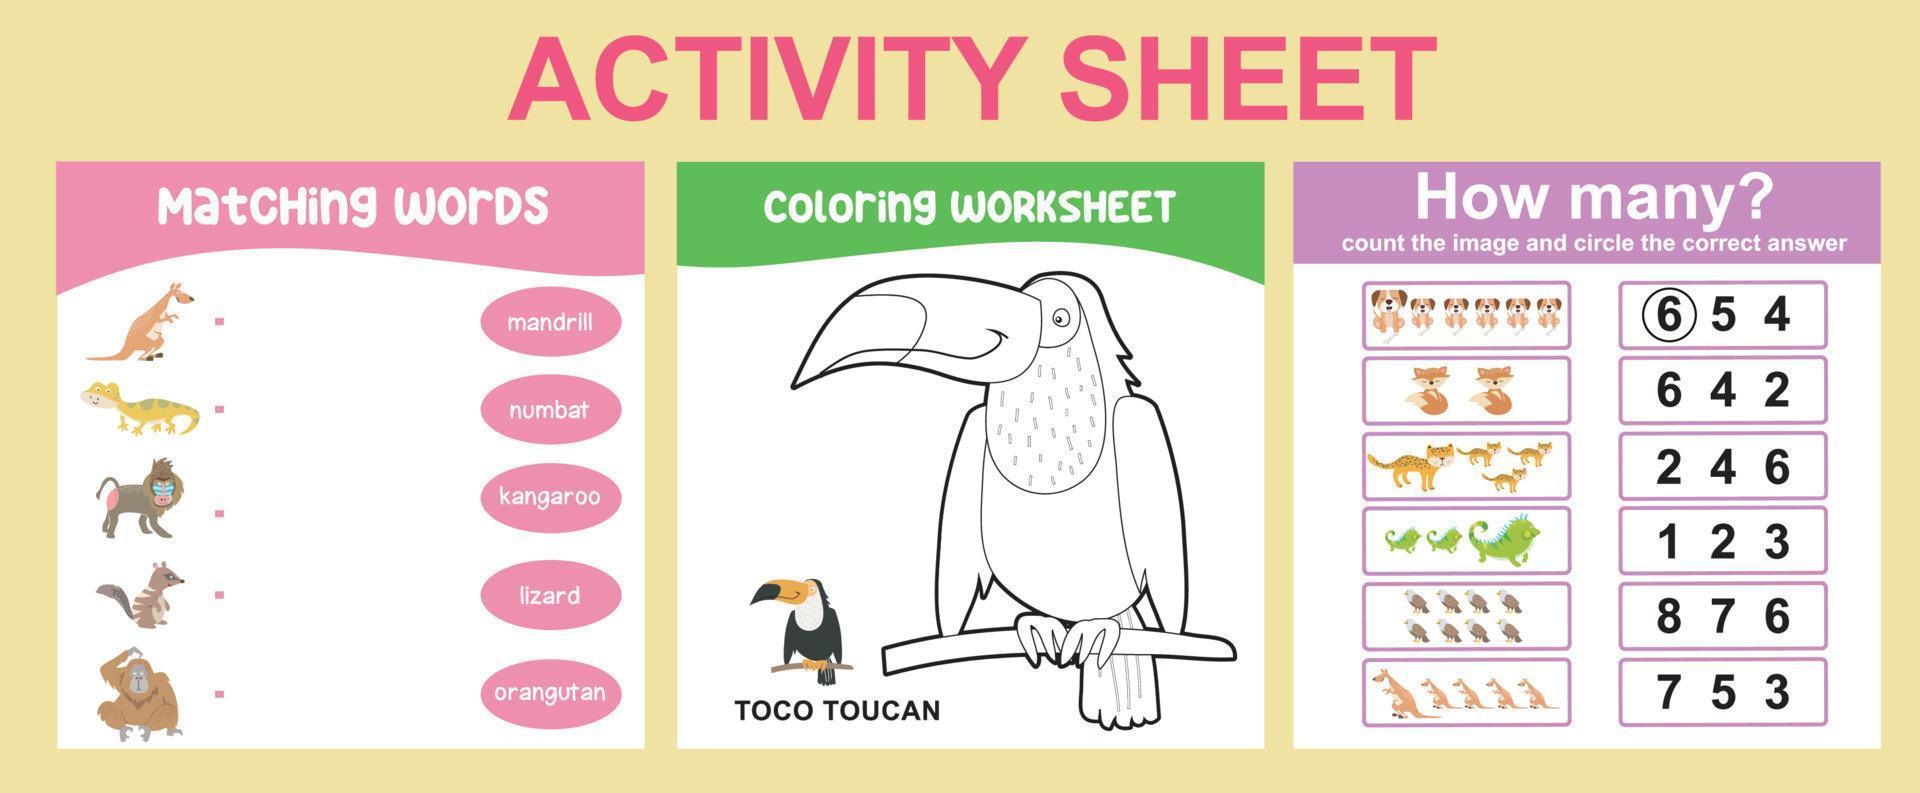 Educational printable worksheet. Activity sheet for children with animal theme. Coloring sheet, matching words, counting how many activity. Vector file.